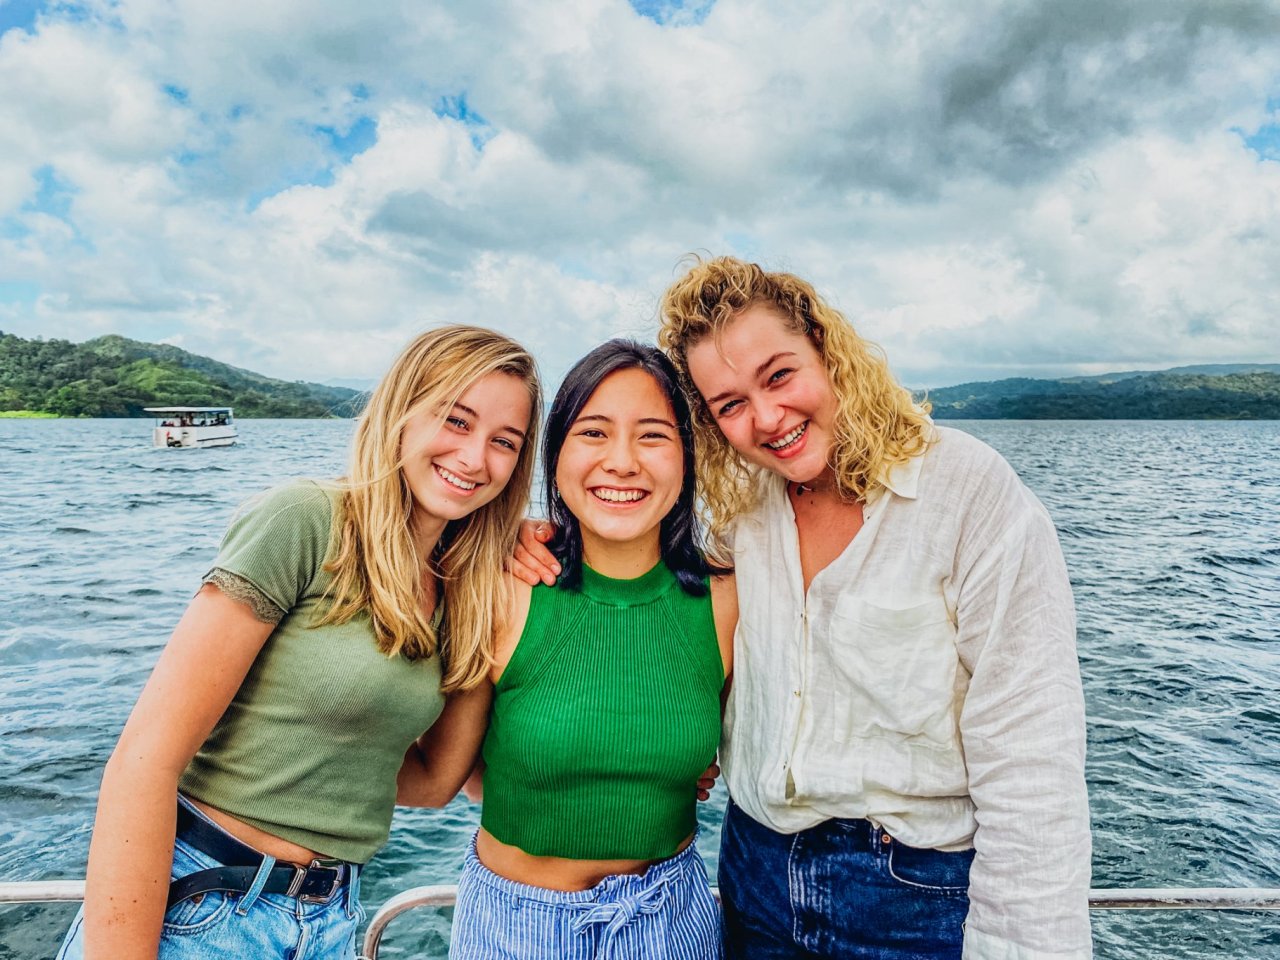 Three young people enjoying a boat ride with a distance view of Costa Rica's green landscape.